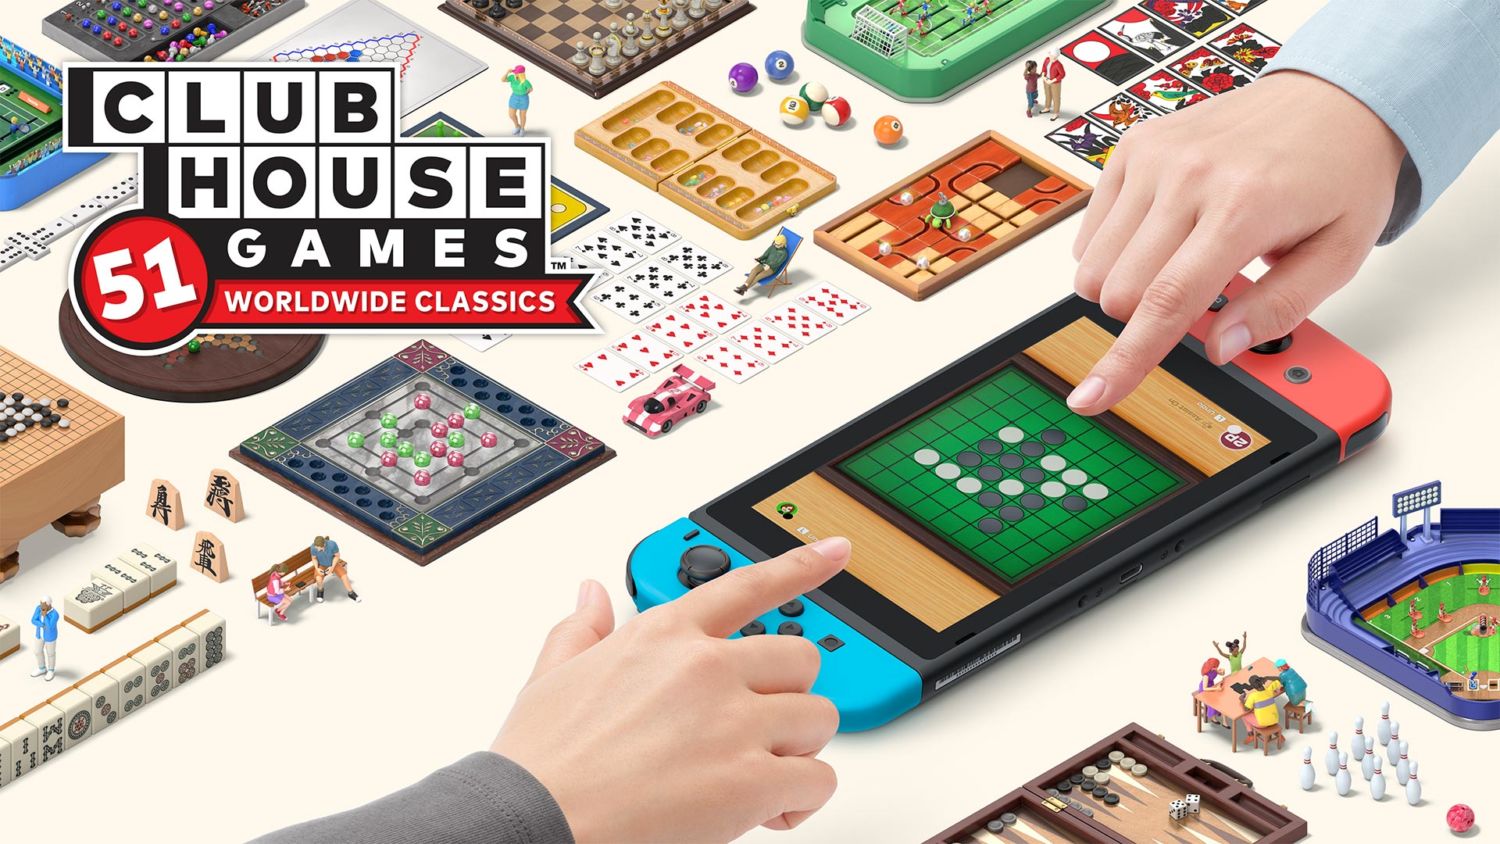 Clubhouse Games: 51 Worldwide Classics' Is the Ultimate Boredom Buster -  The Toy Insider